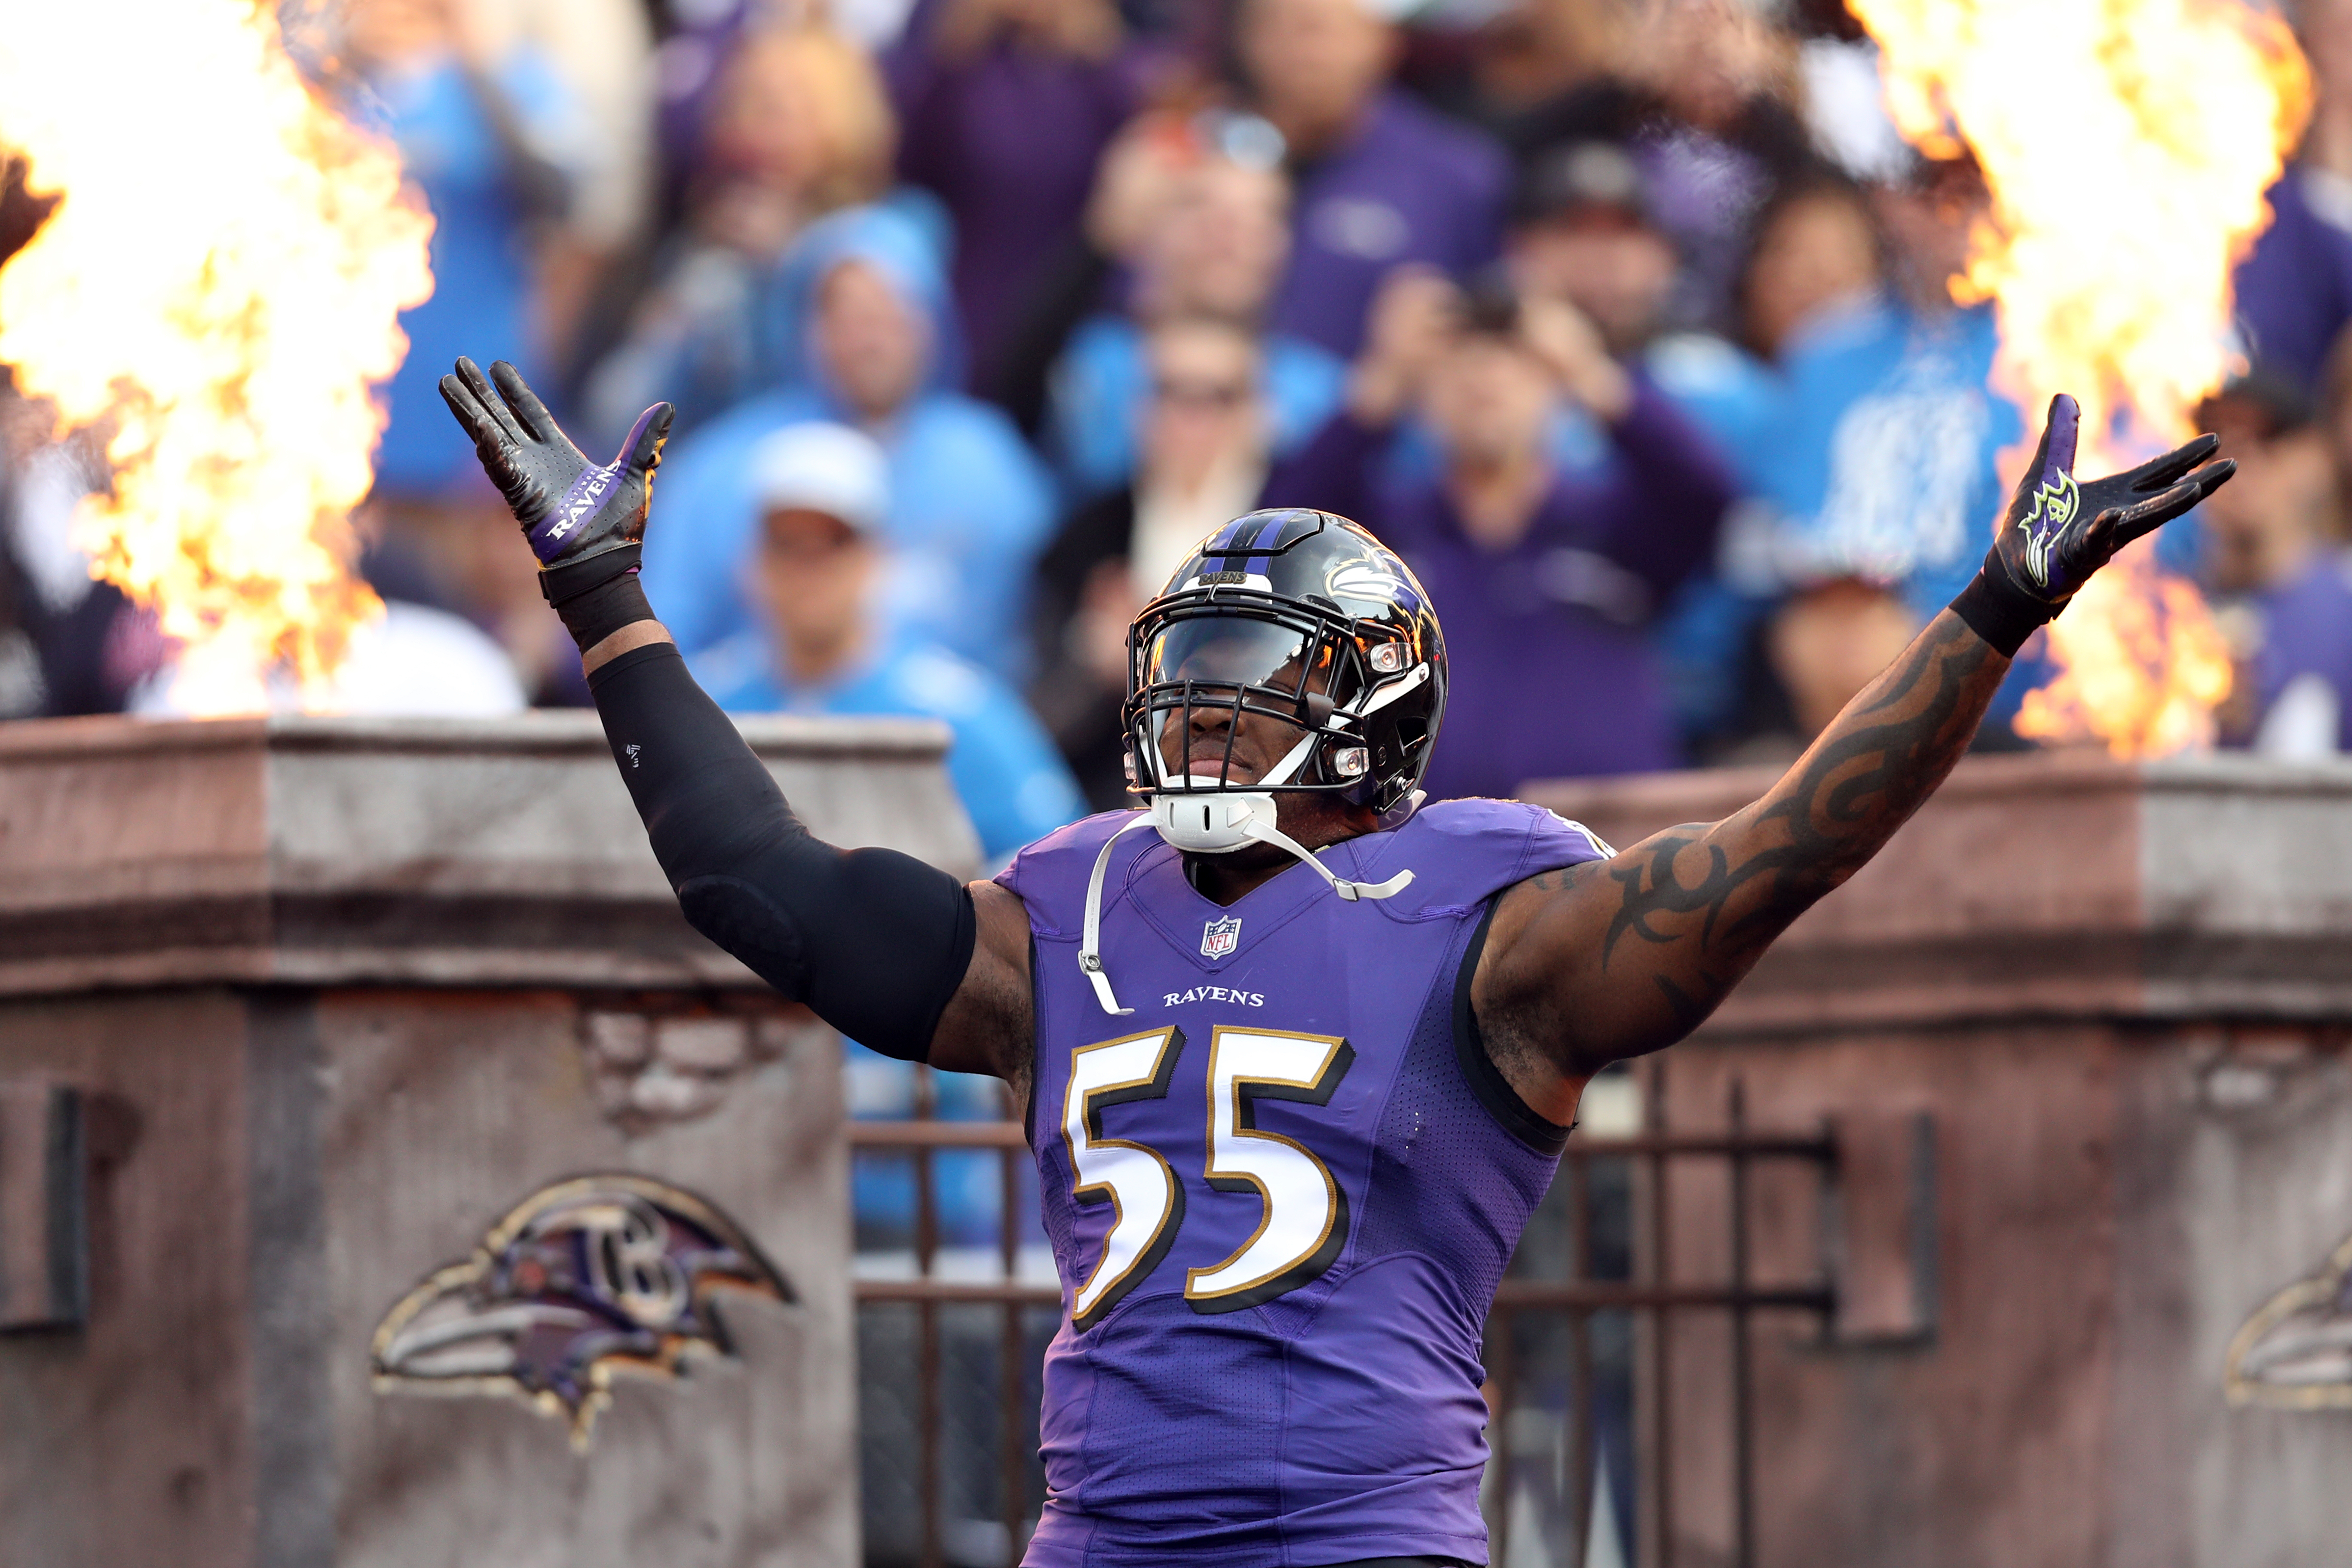 Terrell Suggs shut down Ravens player's request to wear his number